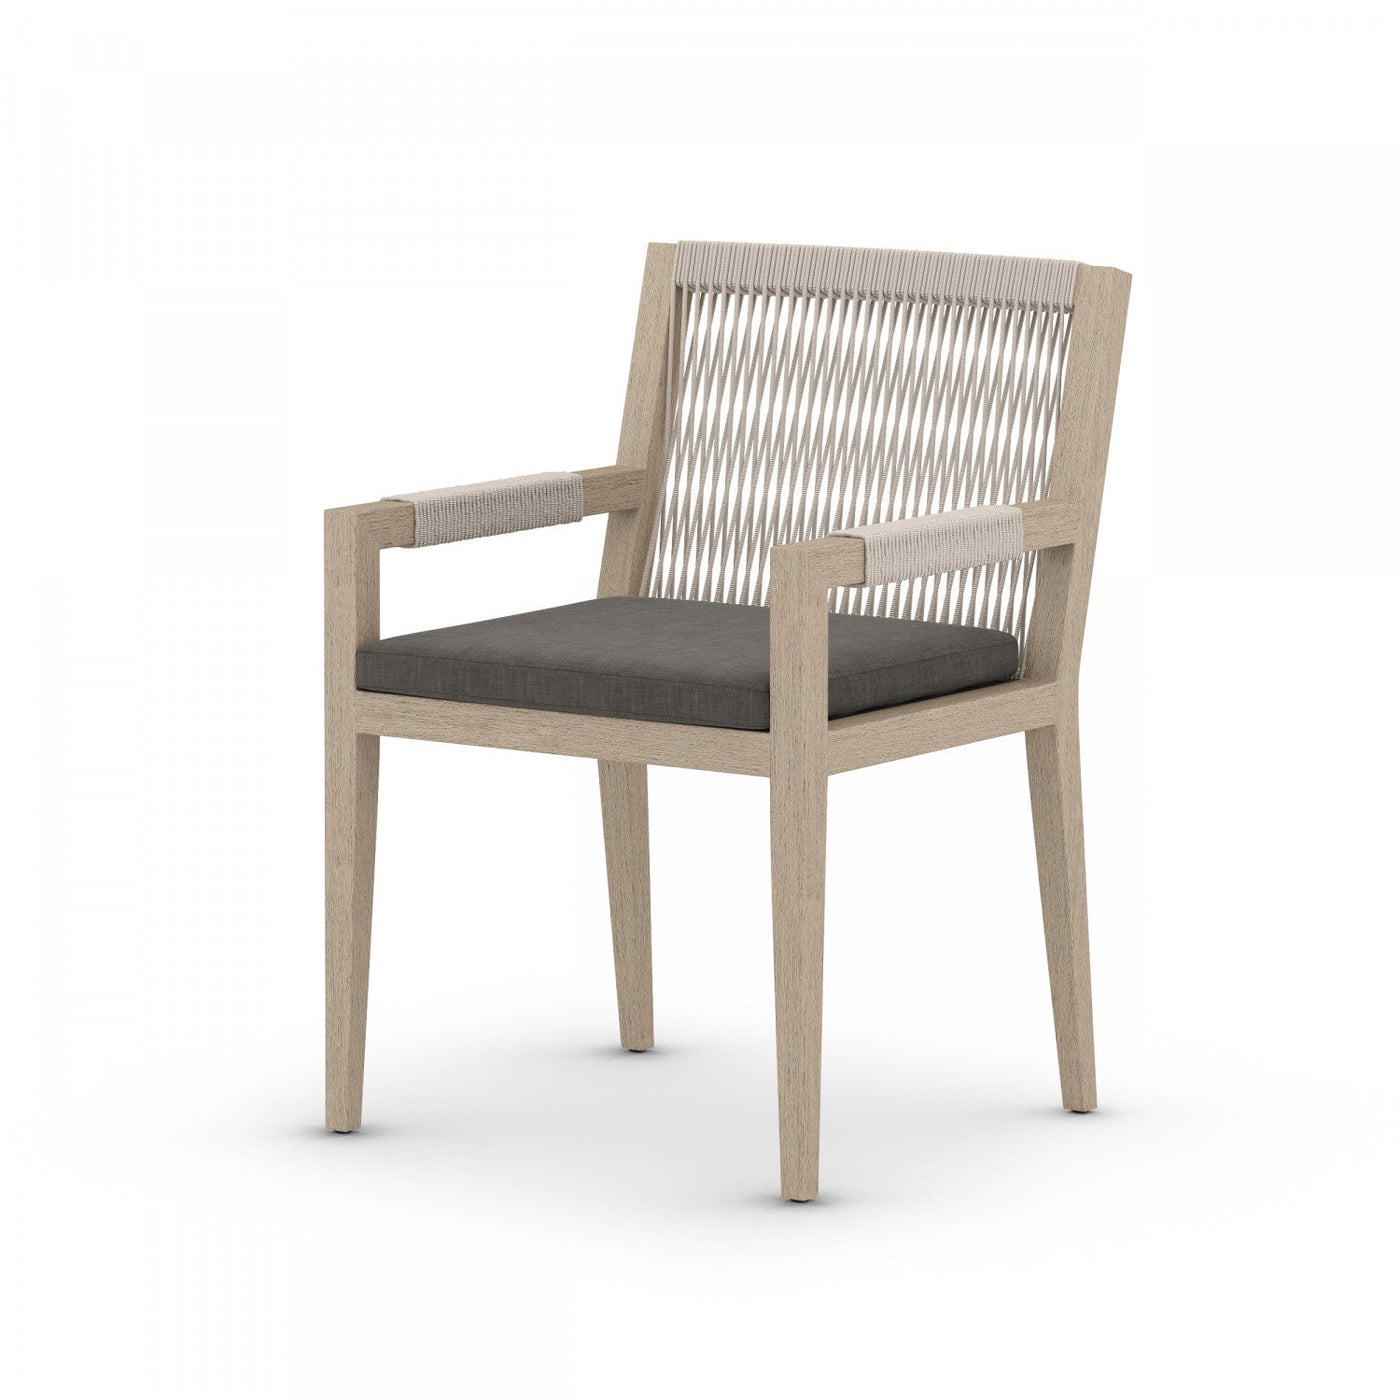 SHERWOOD OUTDOOR DINING ARMCHAIR, WASHED BROWN